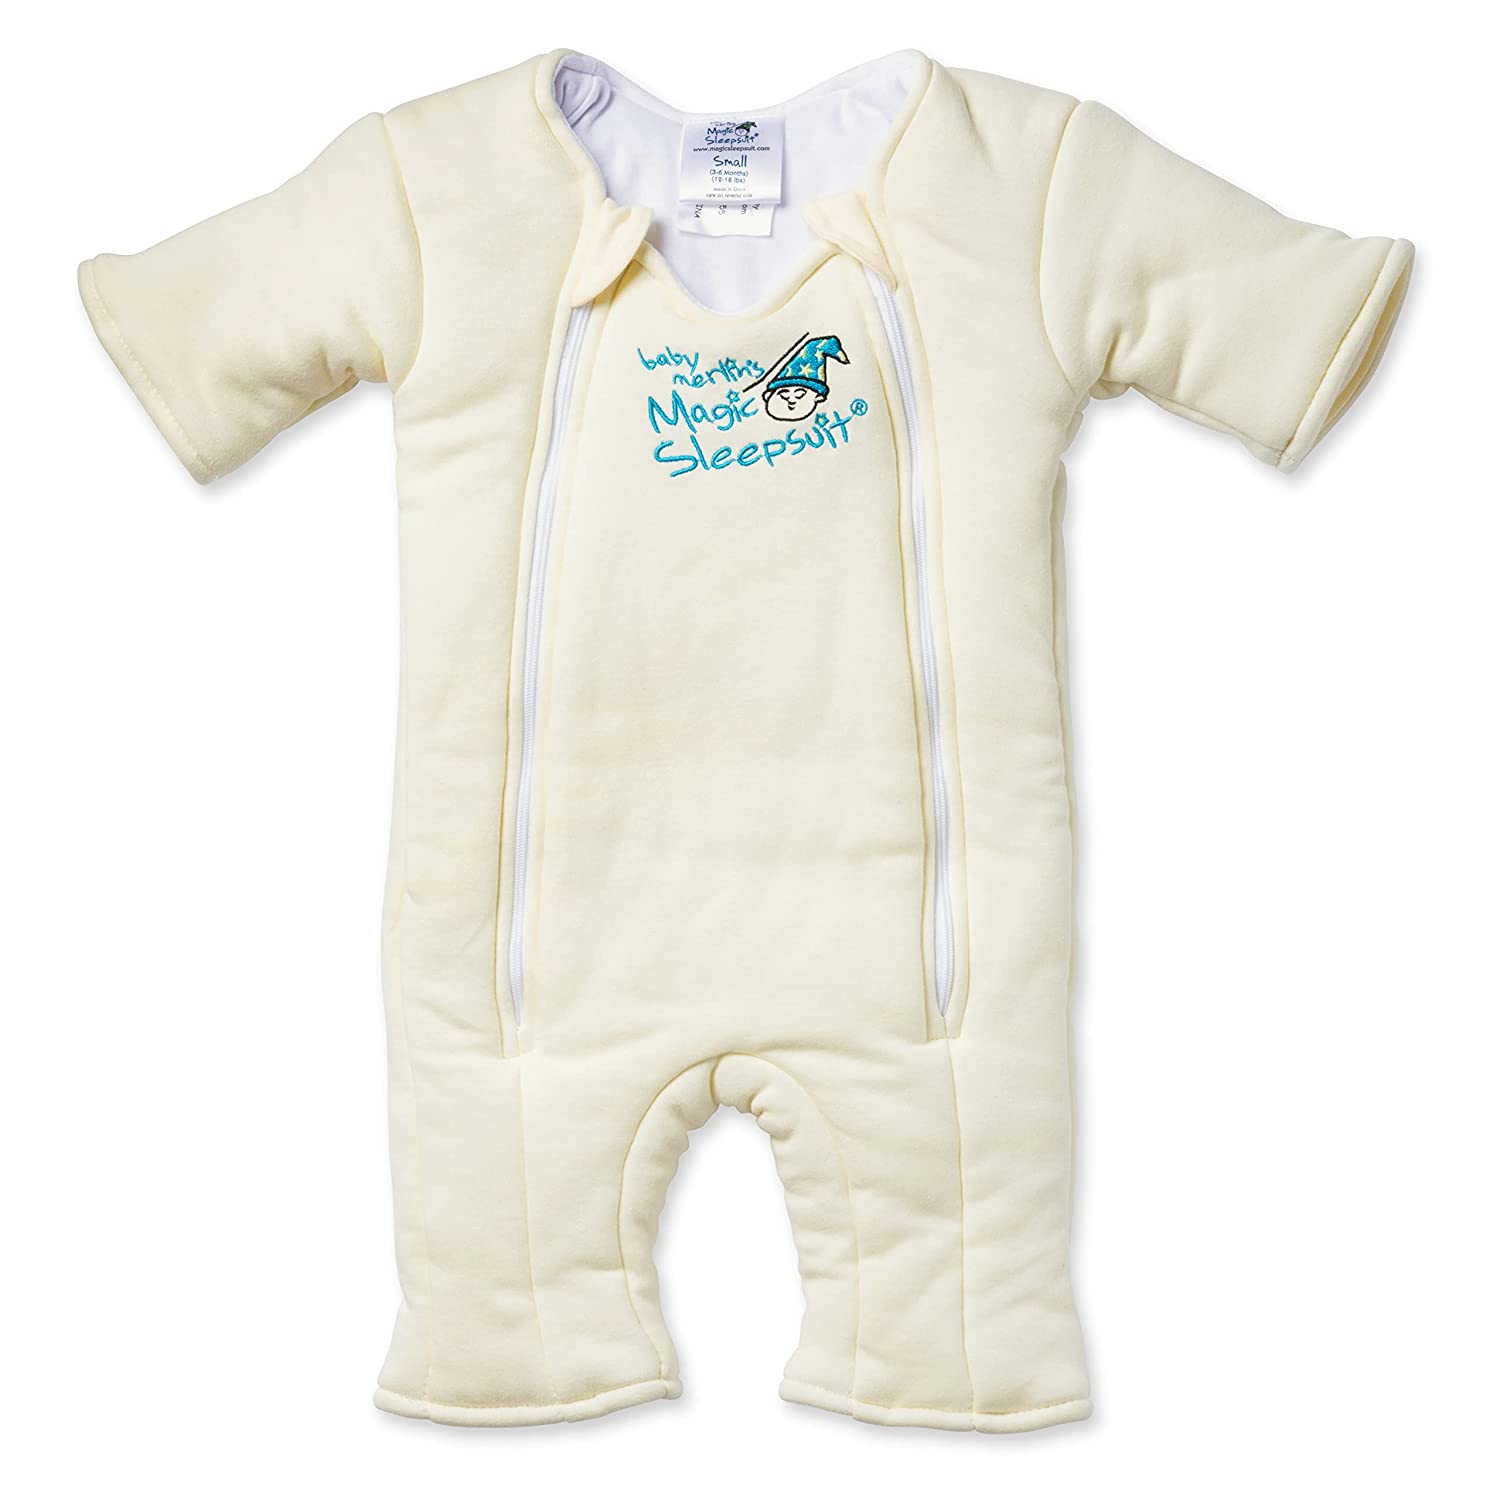 Baby Merlin's Magic Sleepsuit - 100% Cotton Baby Transition Swaddle - Baby Sleep Suit - Cream - 3-6 Months 3-6 Months Cream - image 1 of 7